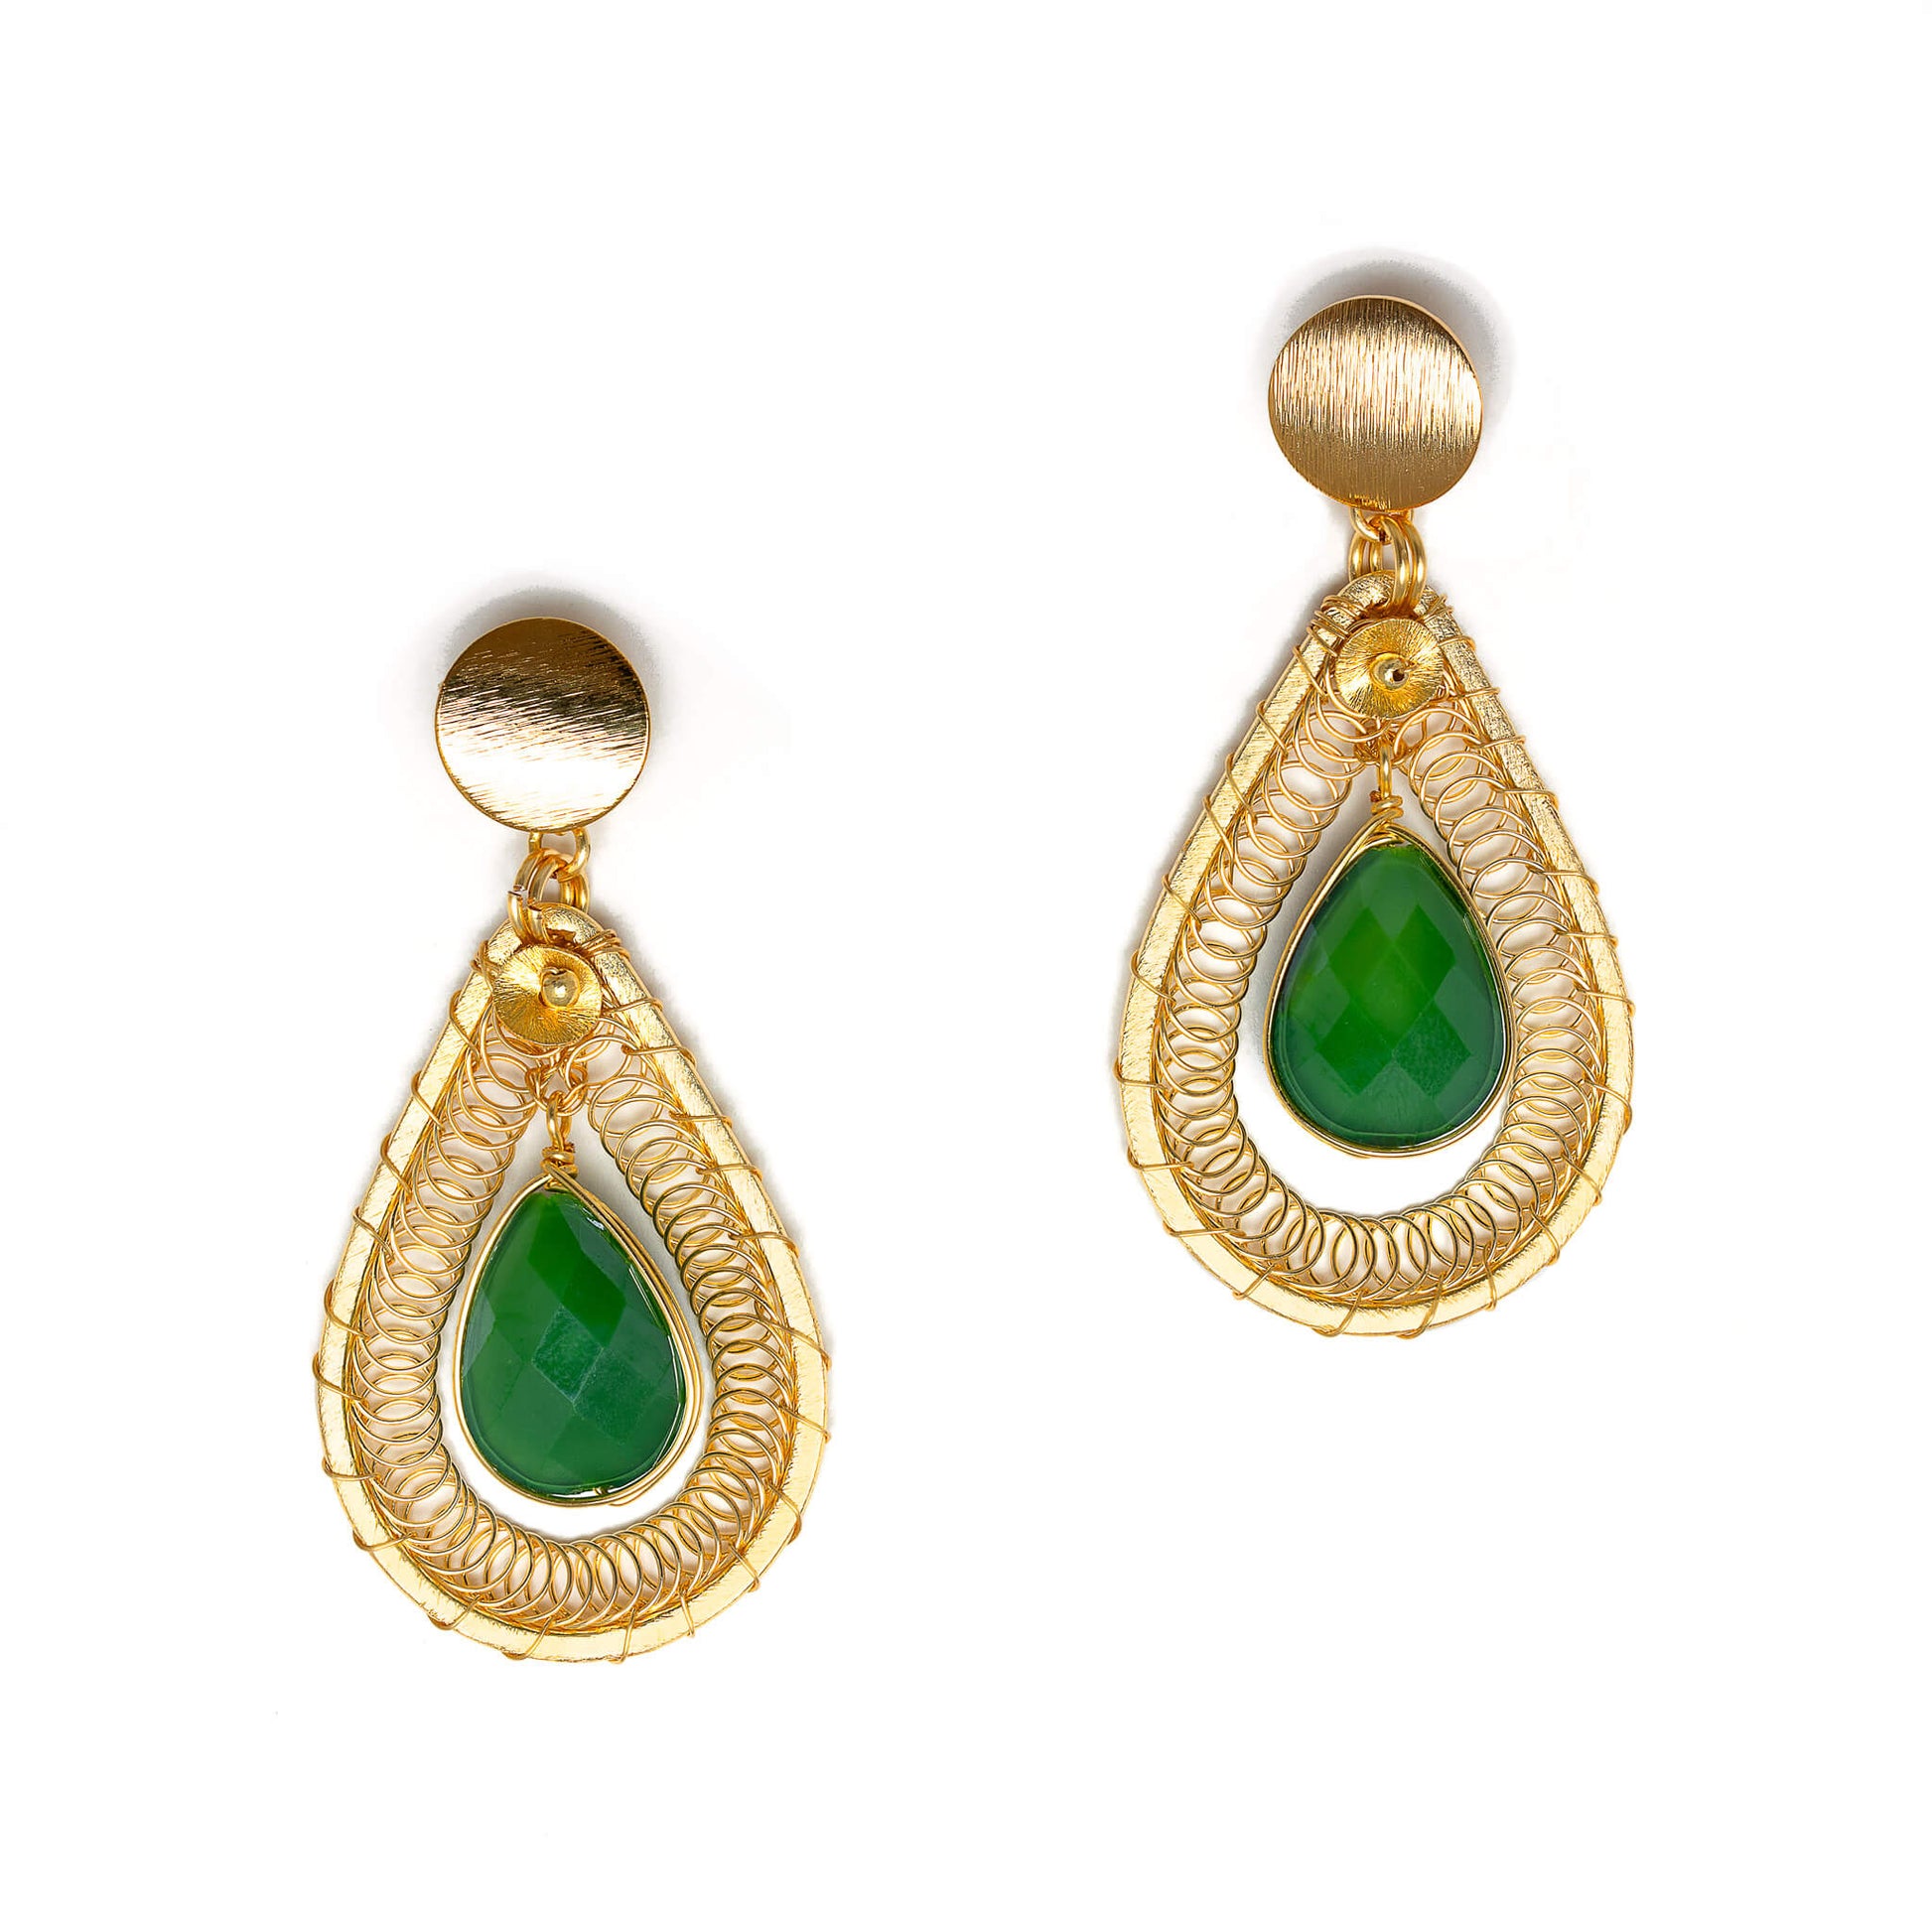 The Ganika teardrop Earrings are 2.25 inches long, Gold and Green Earrings. Wire Wrapped Earrings. Handmade Gold dangle earrings. Feature gold-plated wire and faceted crystal beads.